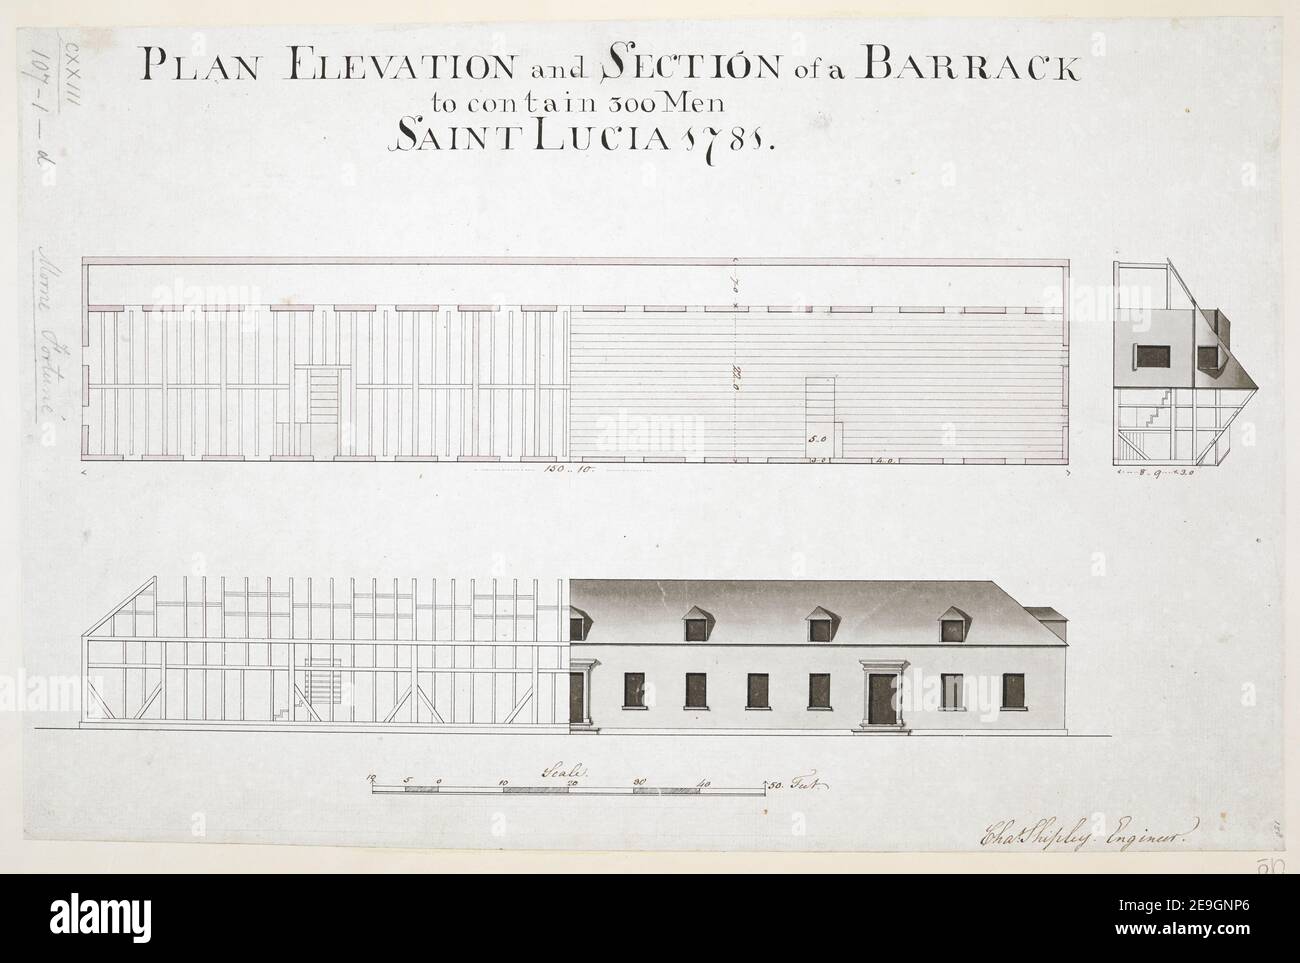 PLAN ELEVATION and SECTION of a BARRACK to contain 300 Men SAINT LUCIA 1781.  Author  Shipley, Charles 123.107.1.d. Date of publication: 1781.  Item type: 1 drawing Medium: ink and wash Dimensions: sheet 31.6 x 49 cm  Former owner: George III, King of Great Britain, 1738-1820 Stock Photo